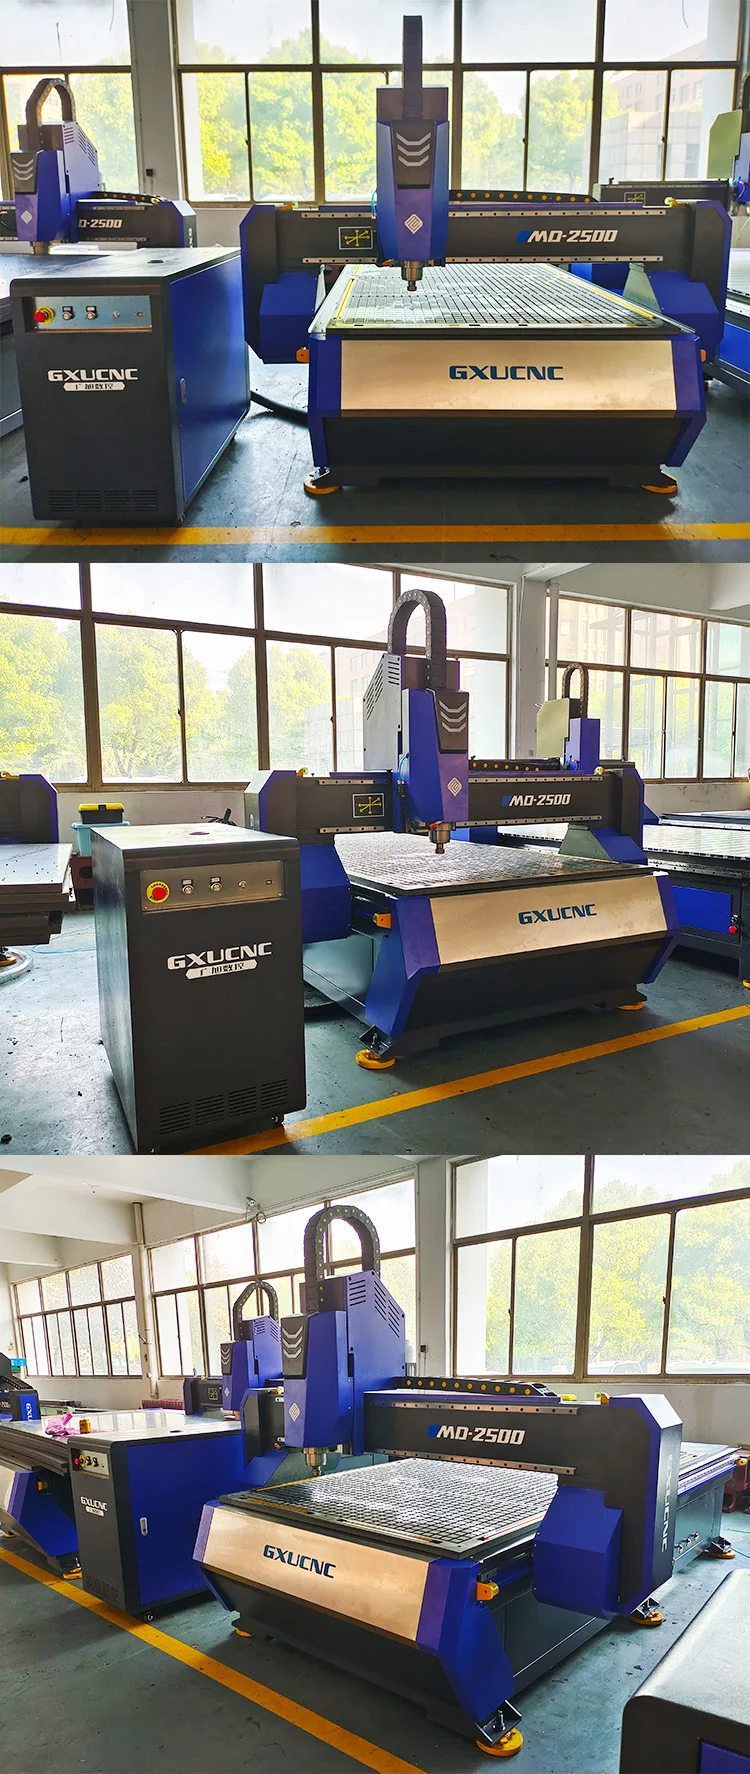 Advanced Technology 1300*2500 3 Axis Cnc Router Engraving Machine Wood Carving Machine Cnc Router